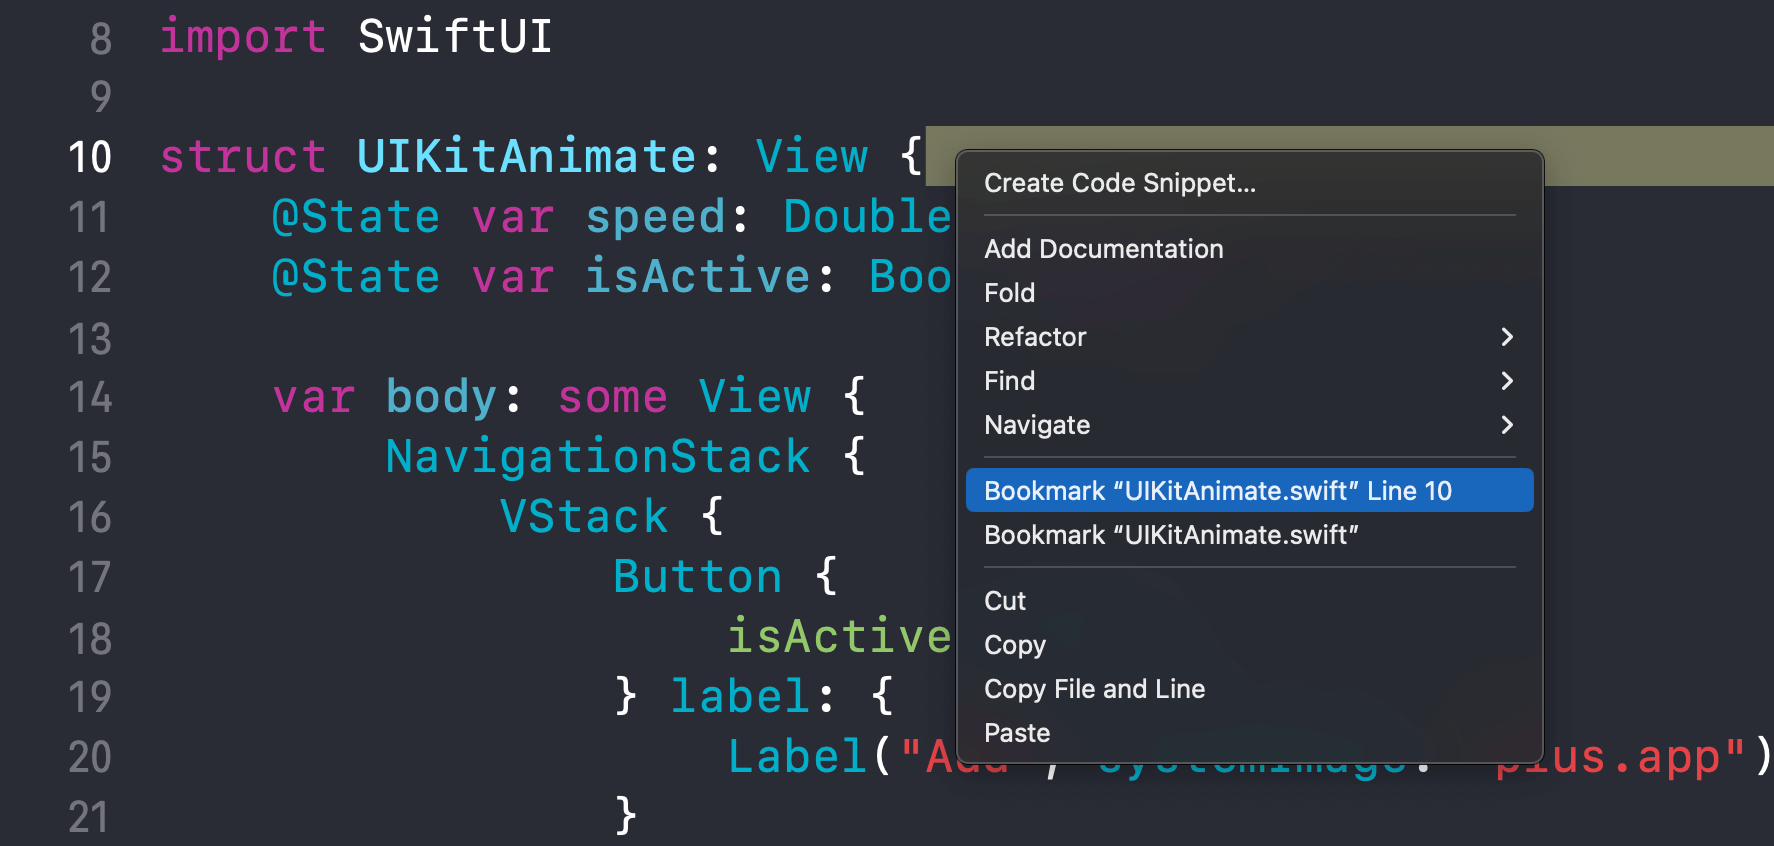 Bookmark on a specific line of code.